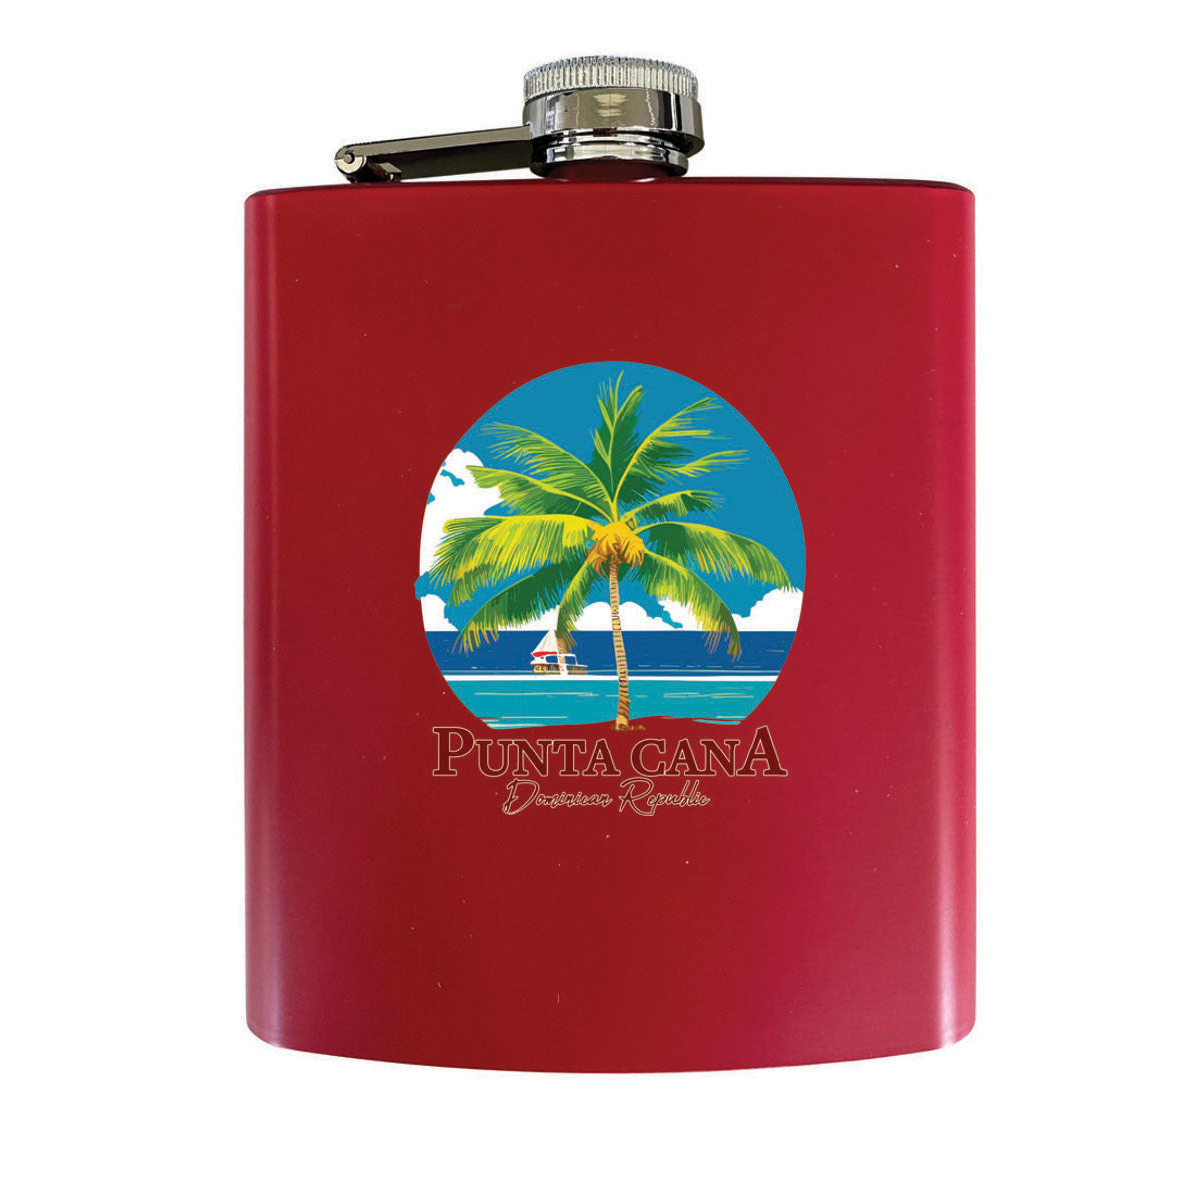 Punta Cana Dominican Republic Souvenir Matte Finish Stainless Steel 7 Oz Flask - Red, PALM